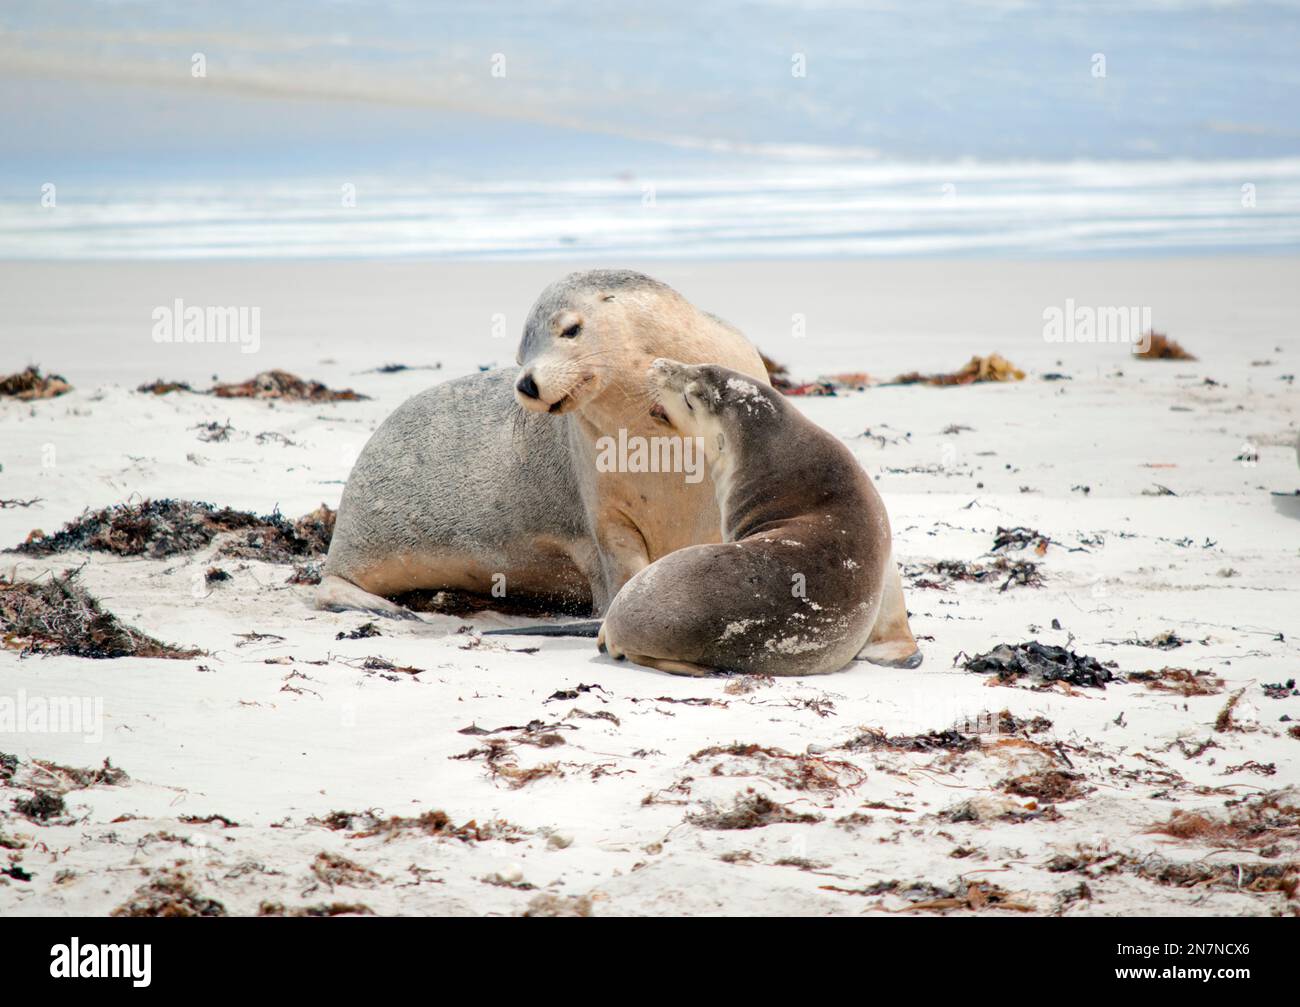 the sea lions are grey on top and white underneath this protects them while swmming in the ocean Stock Photo